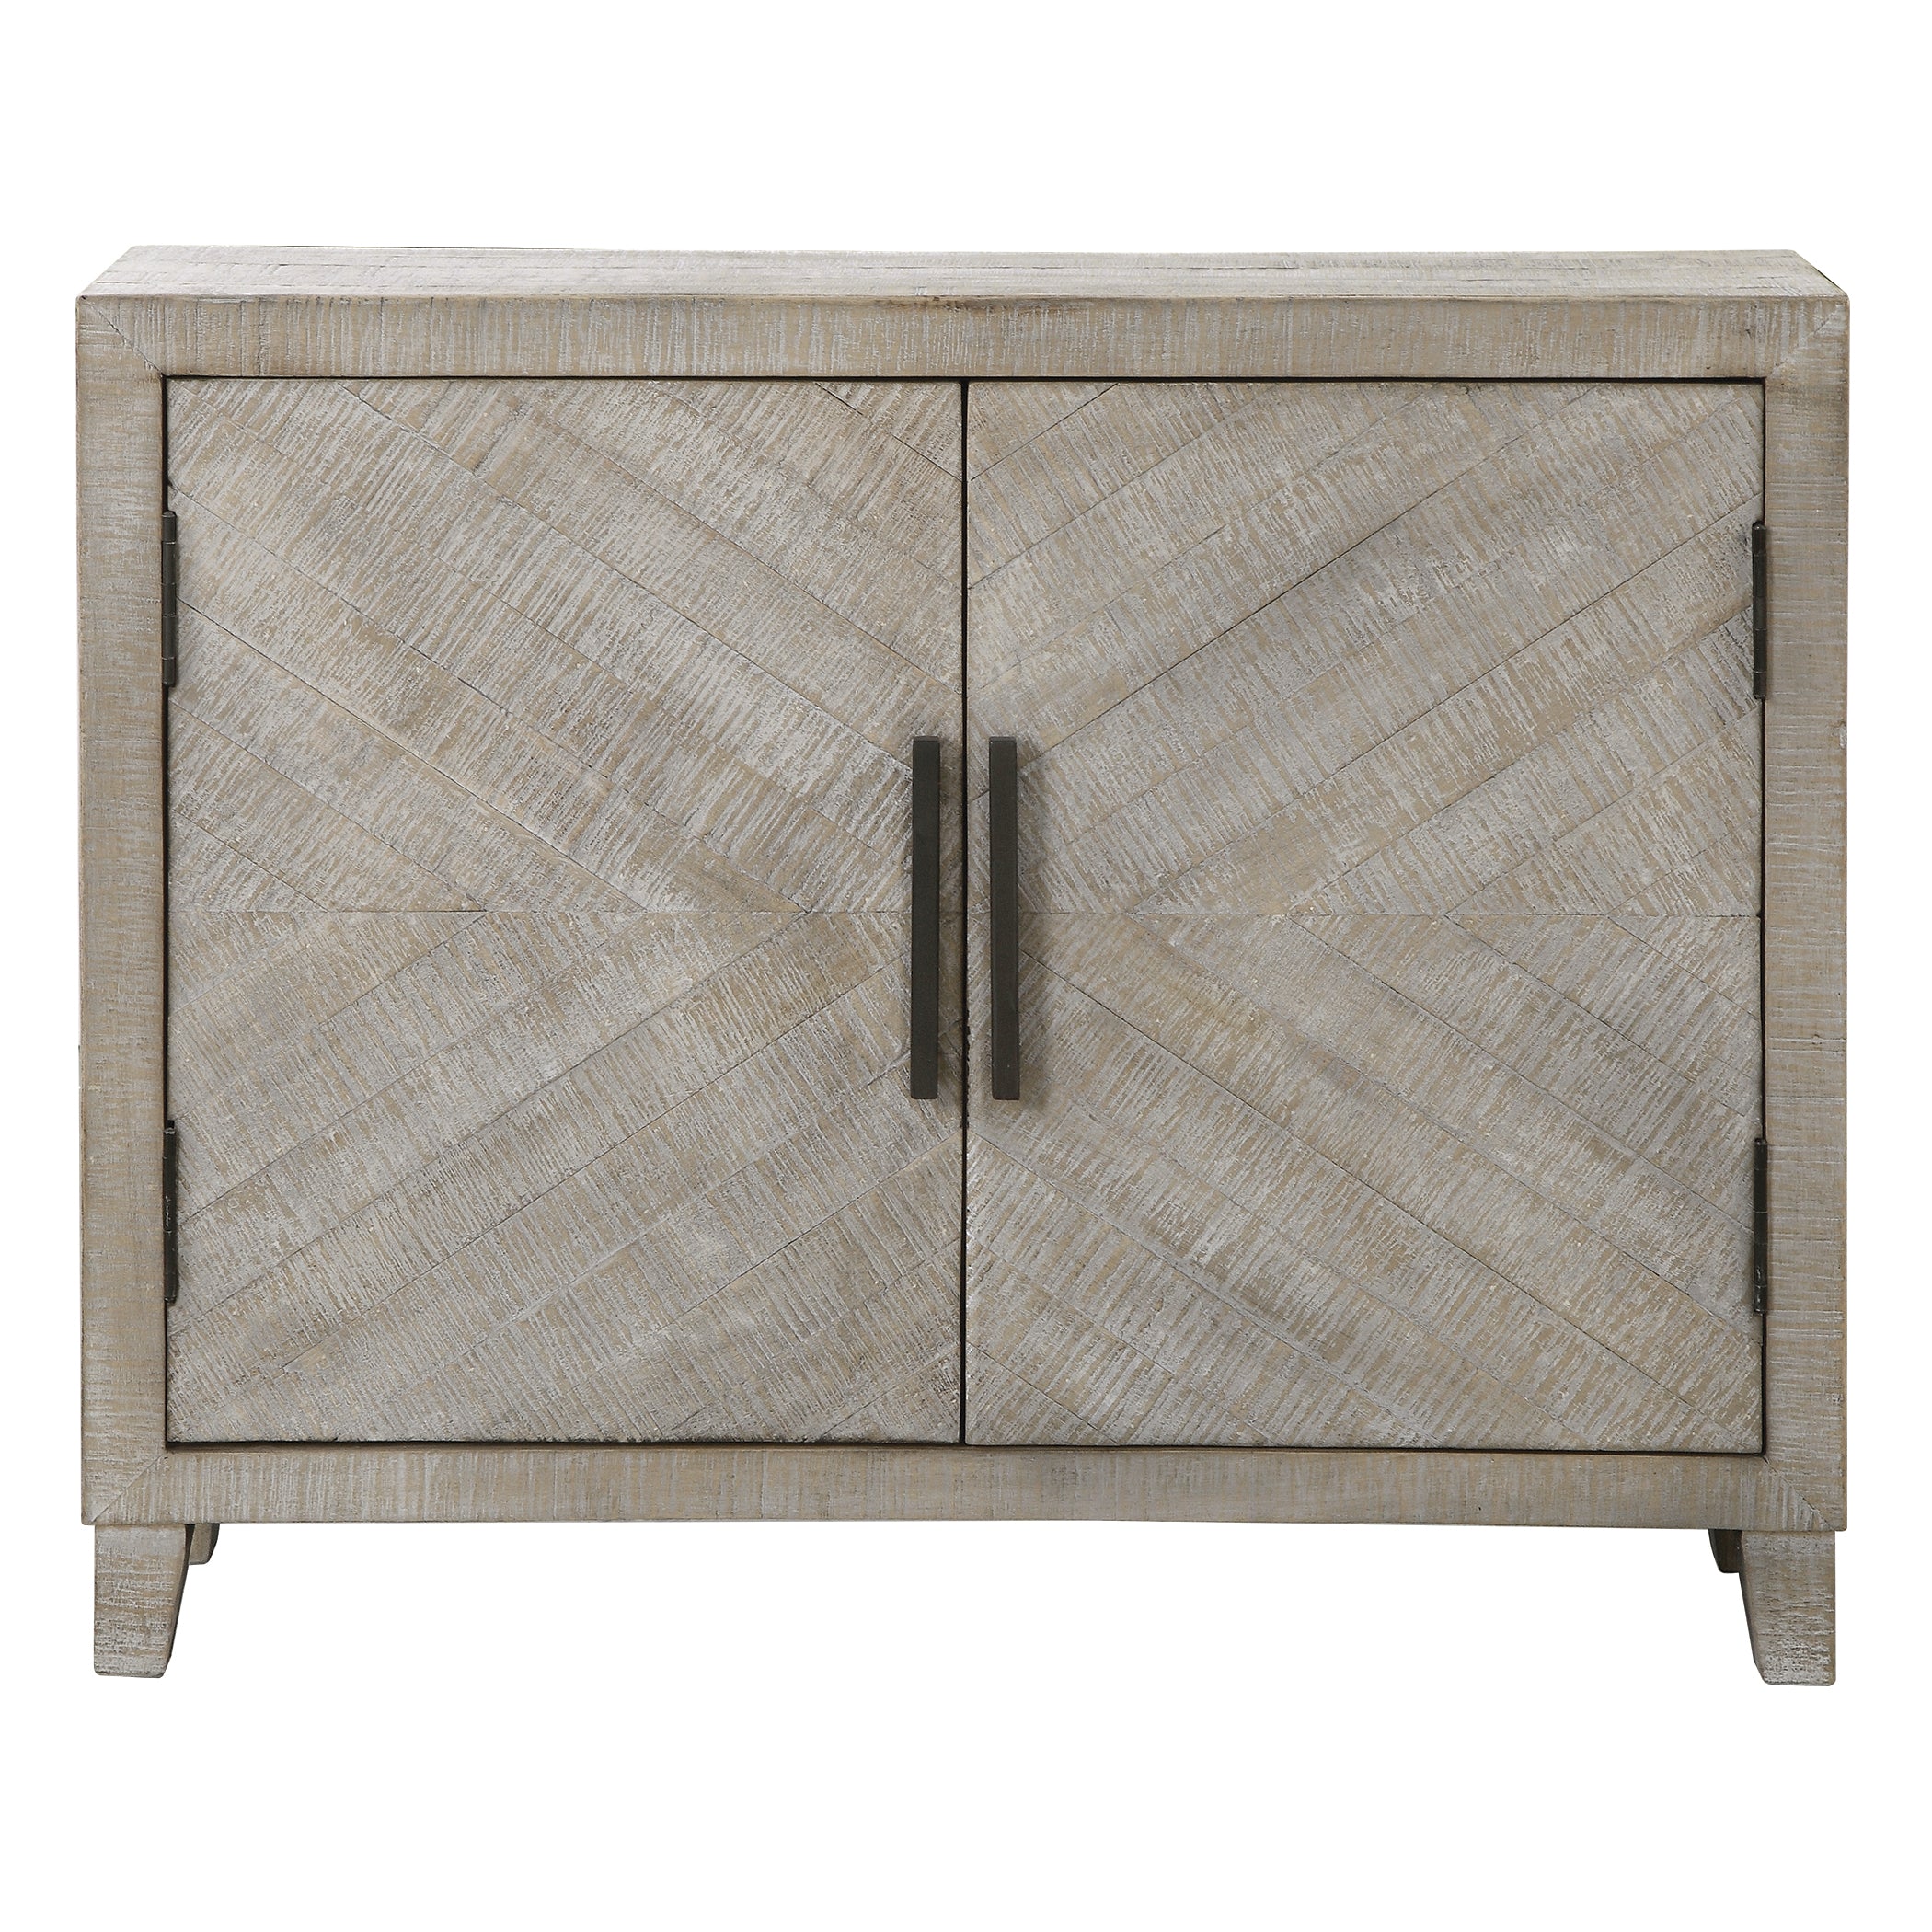 Uttermost Adalind  Accent Cabinets Accent Cabinets Uttermost   